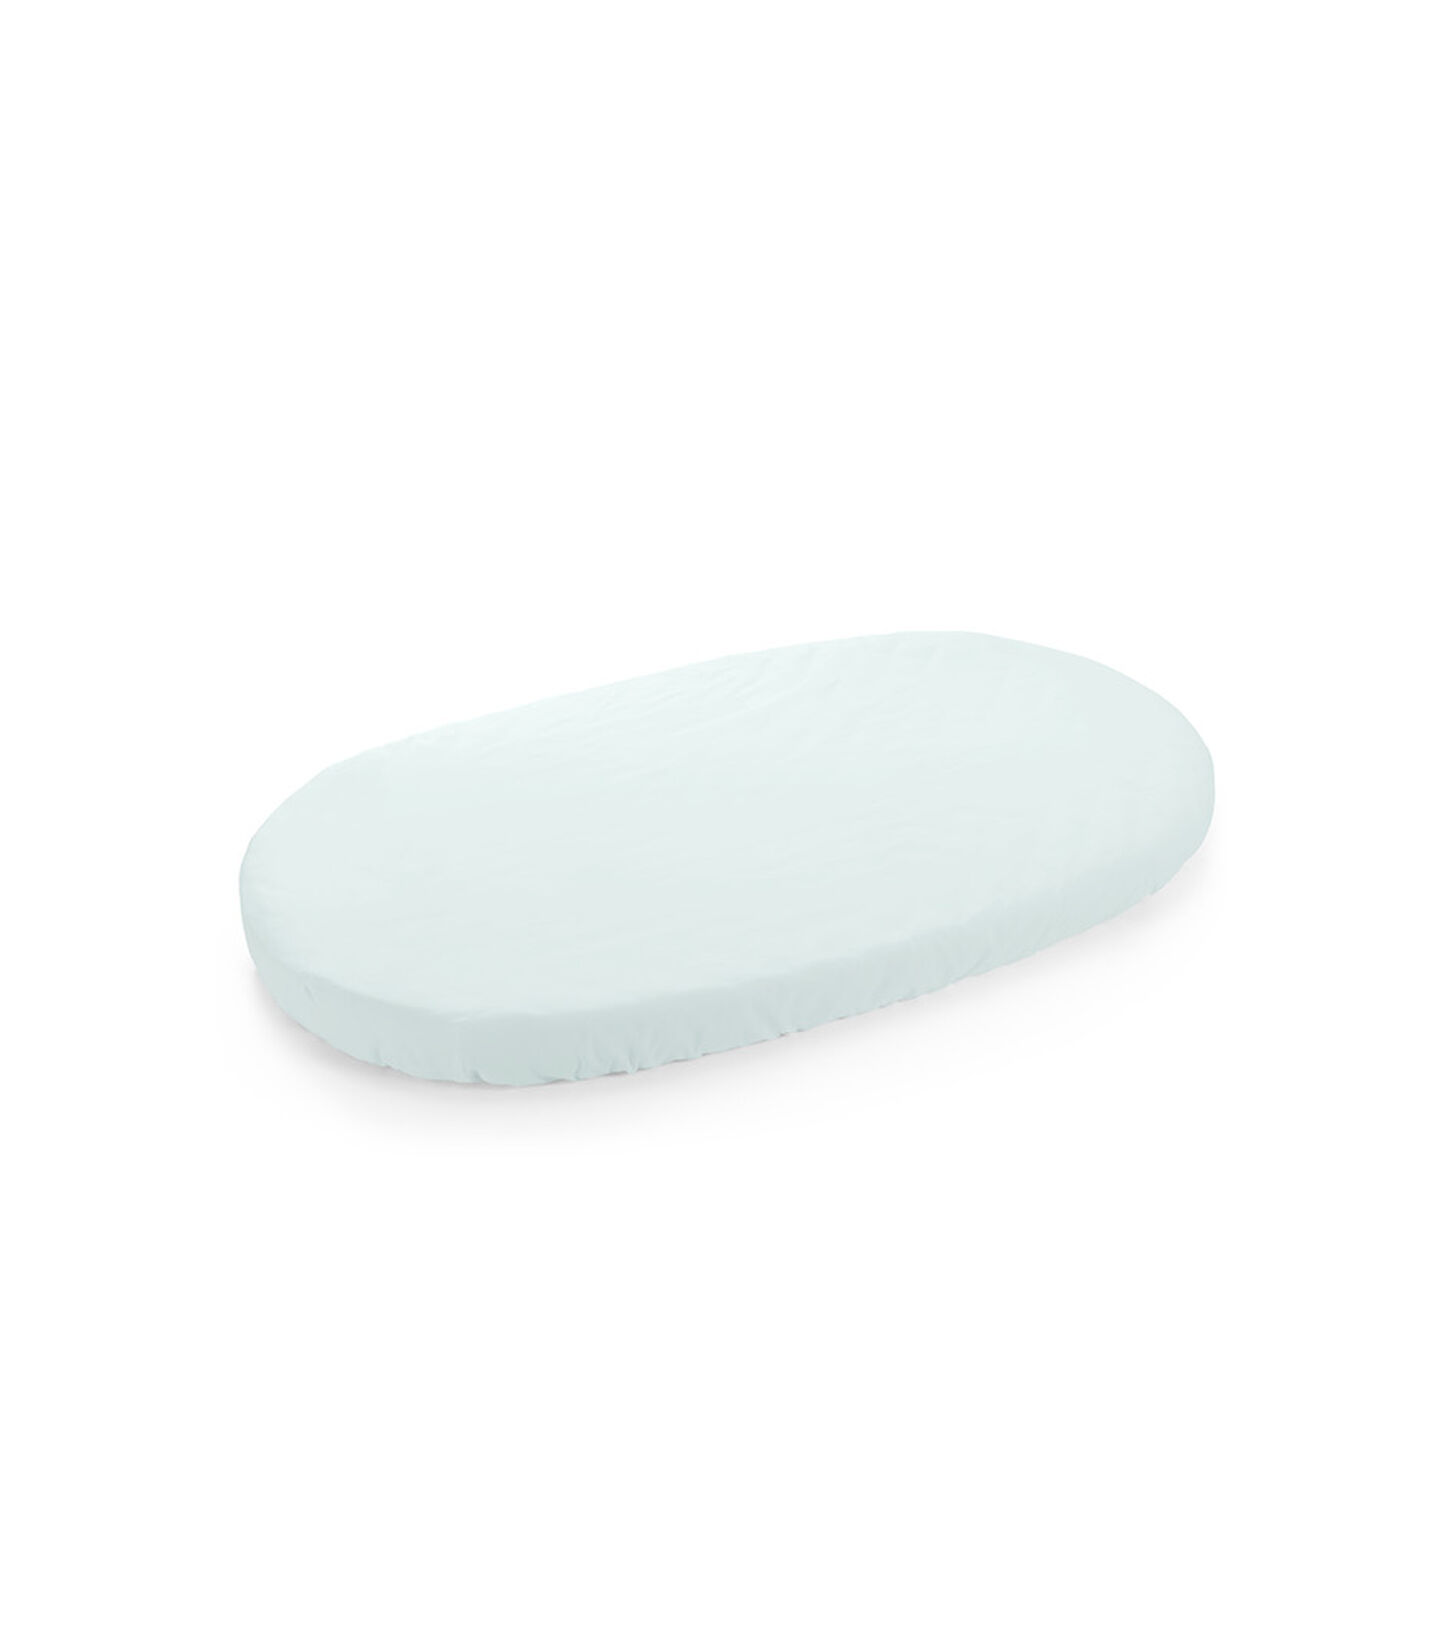 Stokke® Sleepi™ Fitted Sheet Mint, Poudre bleue, mainview view 1